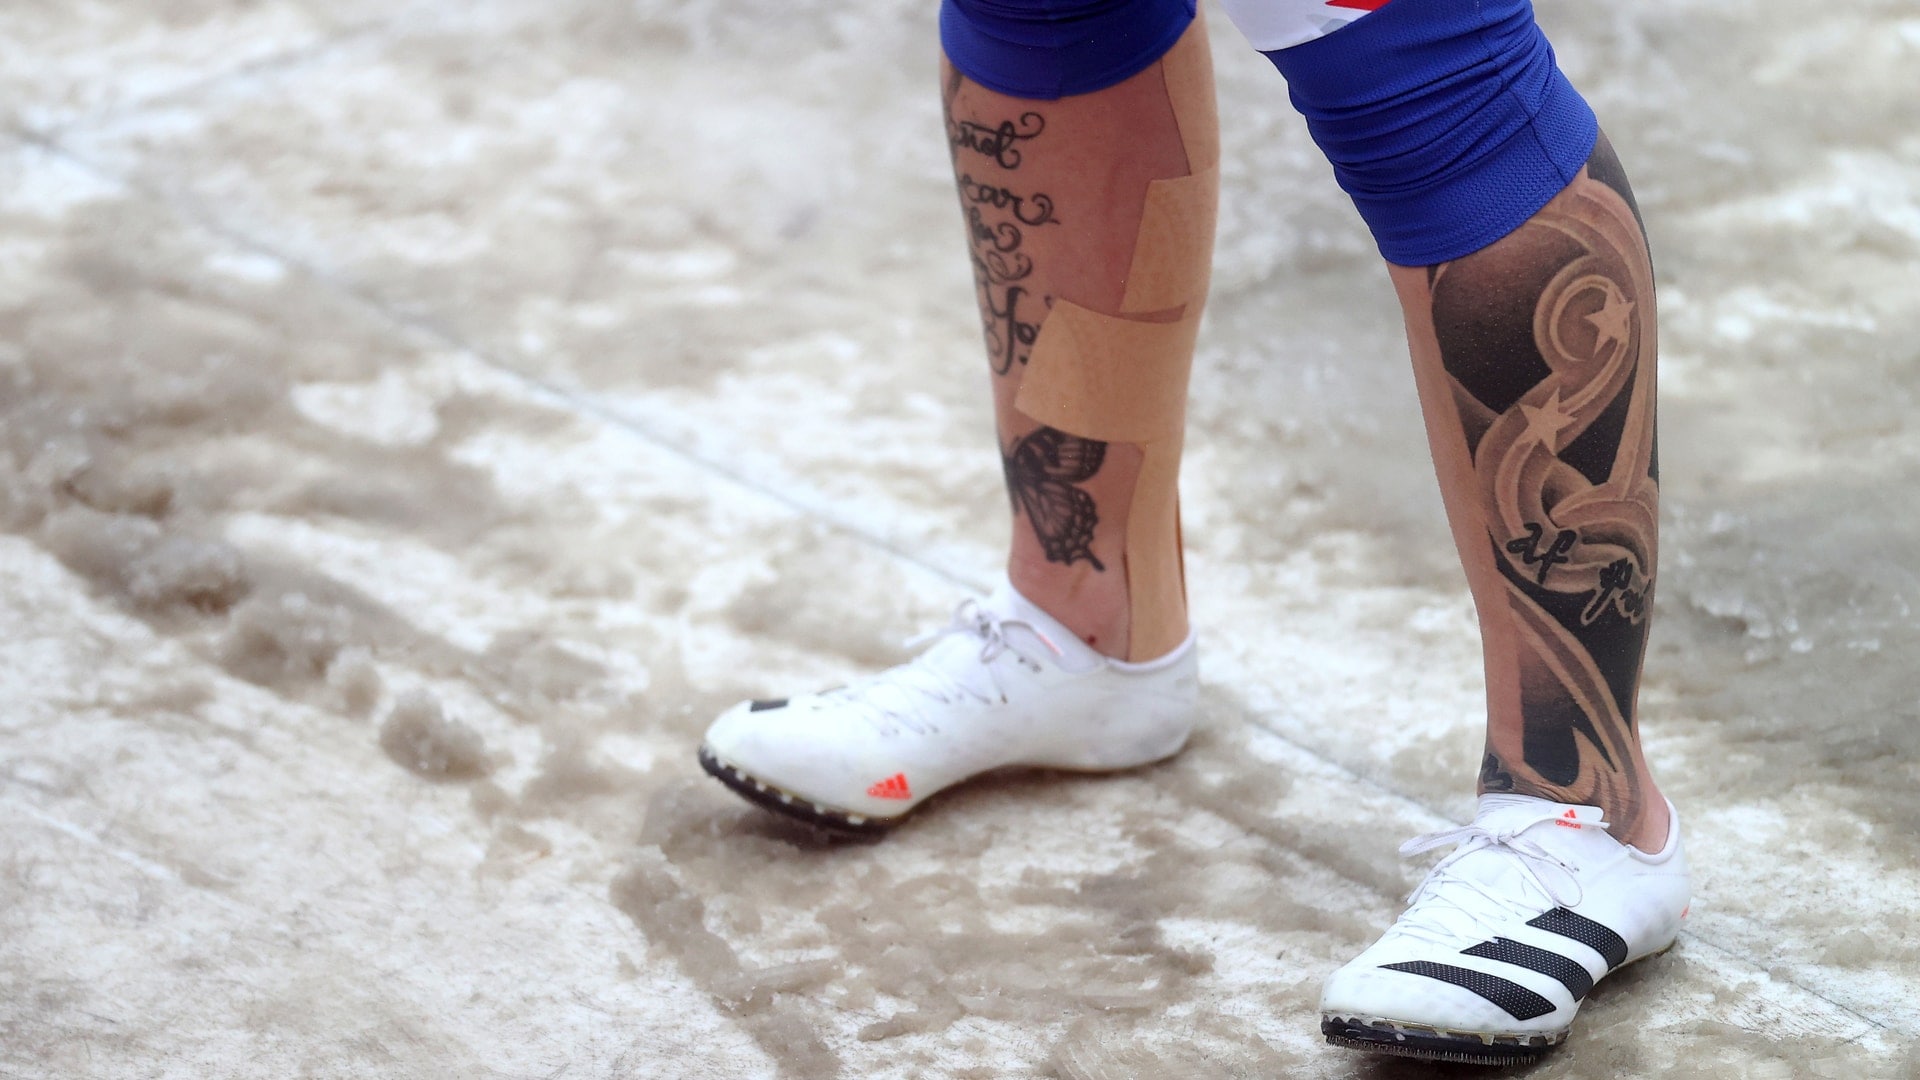 The Podium: The tradition of the Olympic rings tattoo